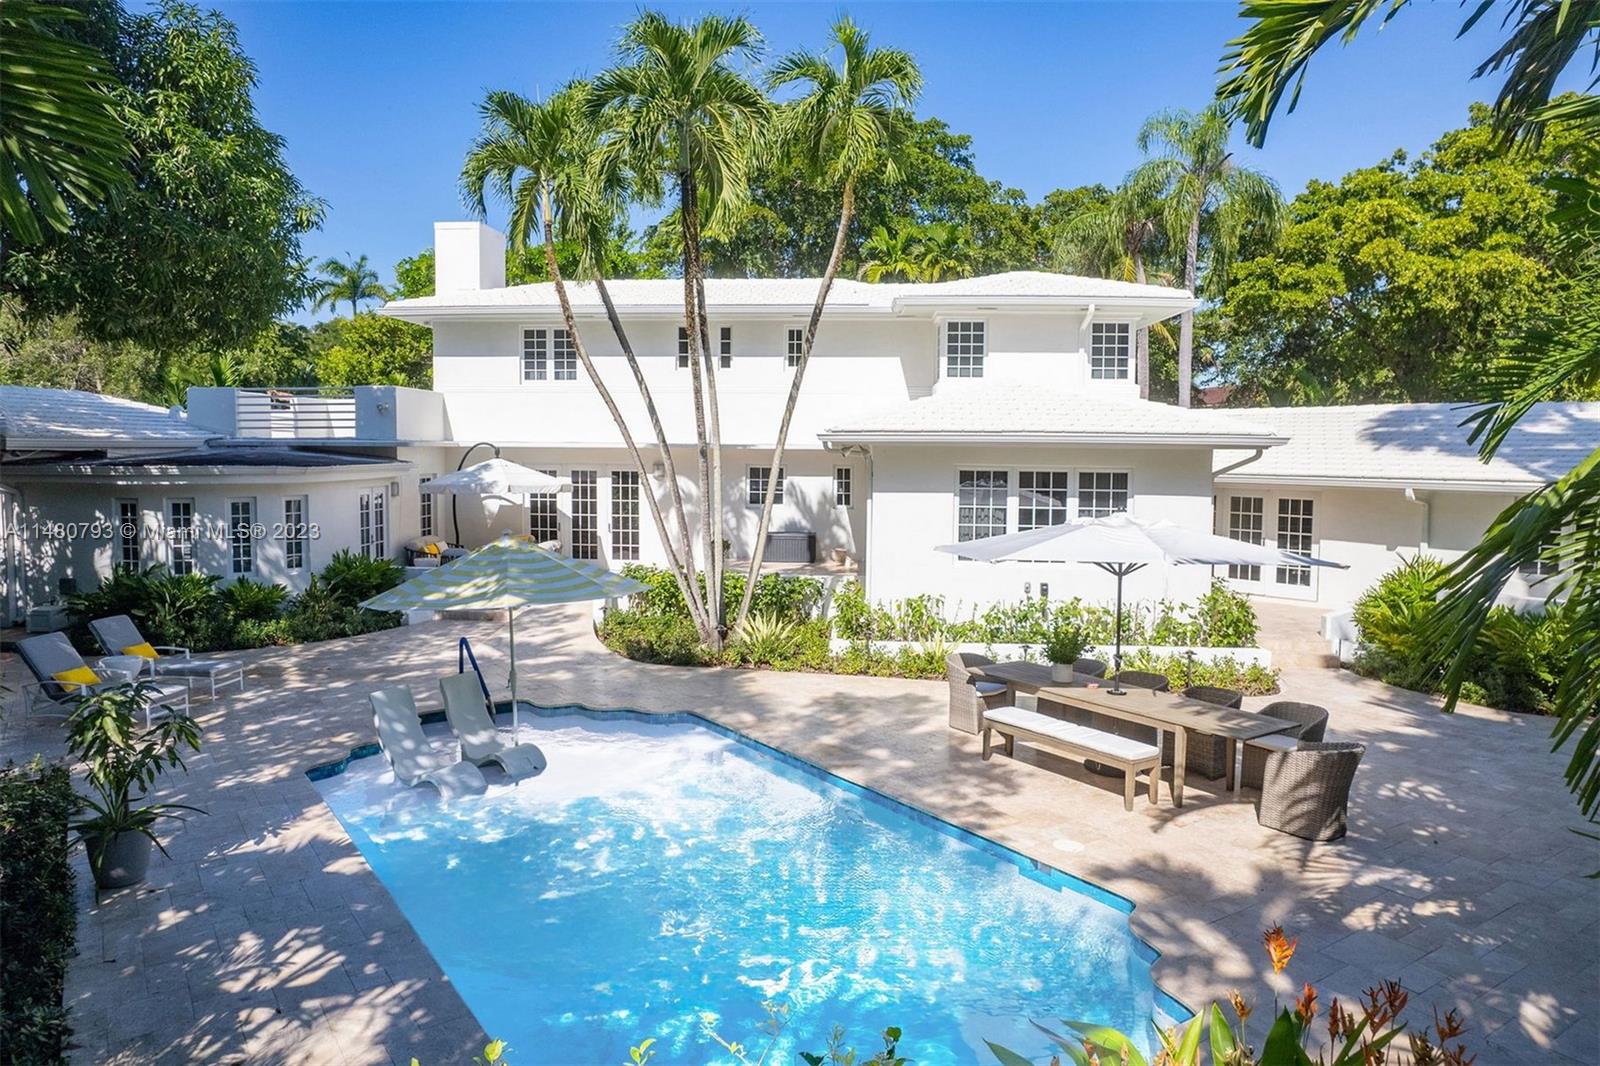 Classic Coral Gables Historic Landmark. This meticulously maintained home with many of its original Art Deco features is perfectly located, near fine dining, Miricale Mile, The Biltmore Hotel and Venetian Pool. Remodeled first floor primary suite, with lounge area leading to the backyard and private patio. All new bathrooms, including cabana bath. Meile, Wolf and Subzero appliances in a spacious eat-in kitchen. Less than four-year-old roof, 2 car garage with separate A/C This elegant ample home has too many updates and features to mention a must see. Presently being used as a three bedroom easily converted to four.